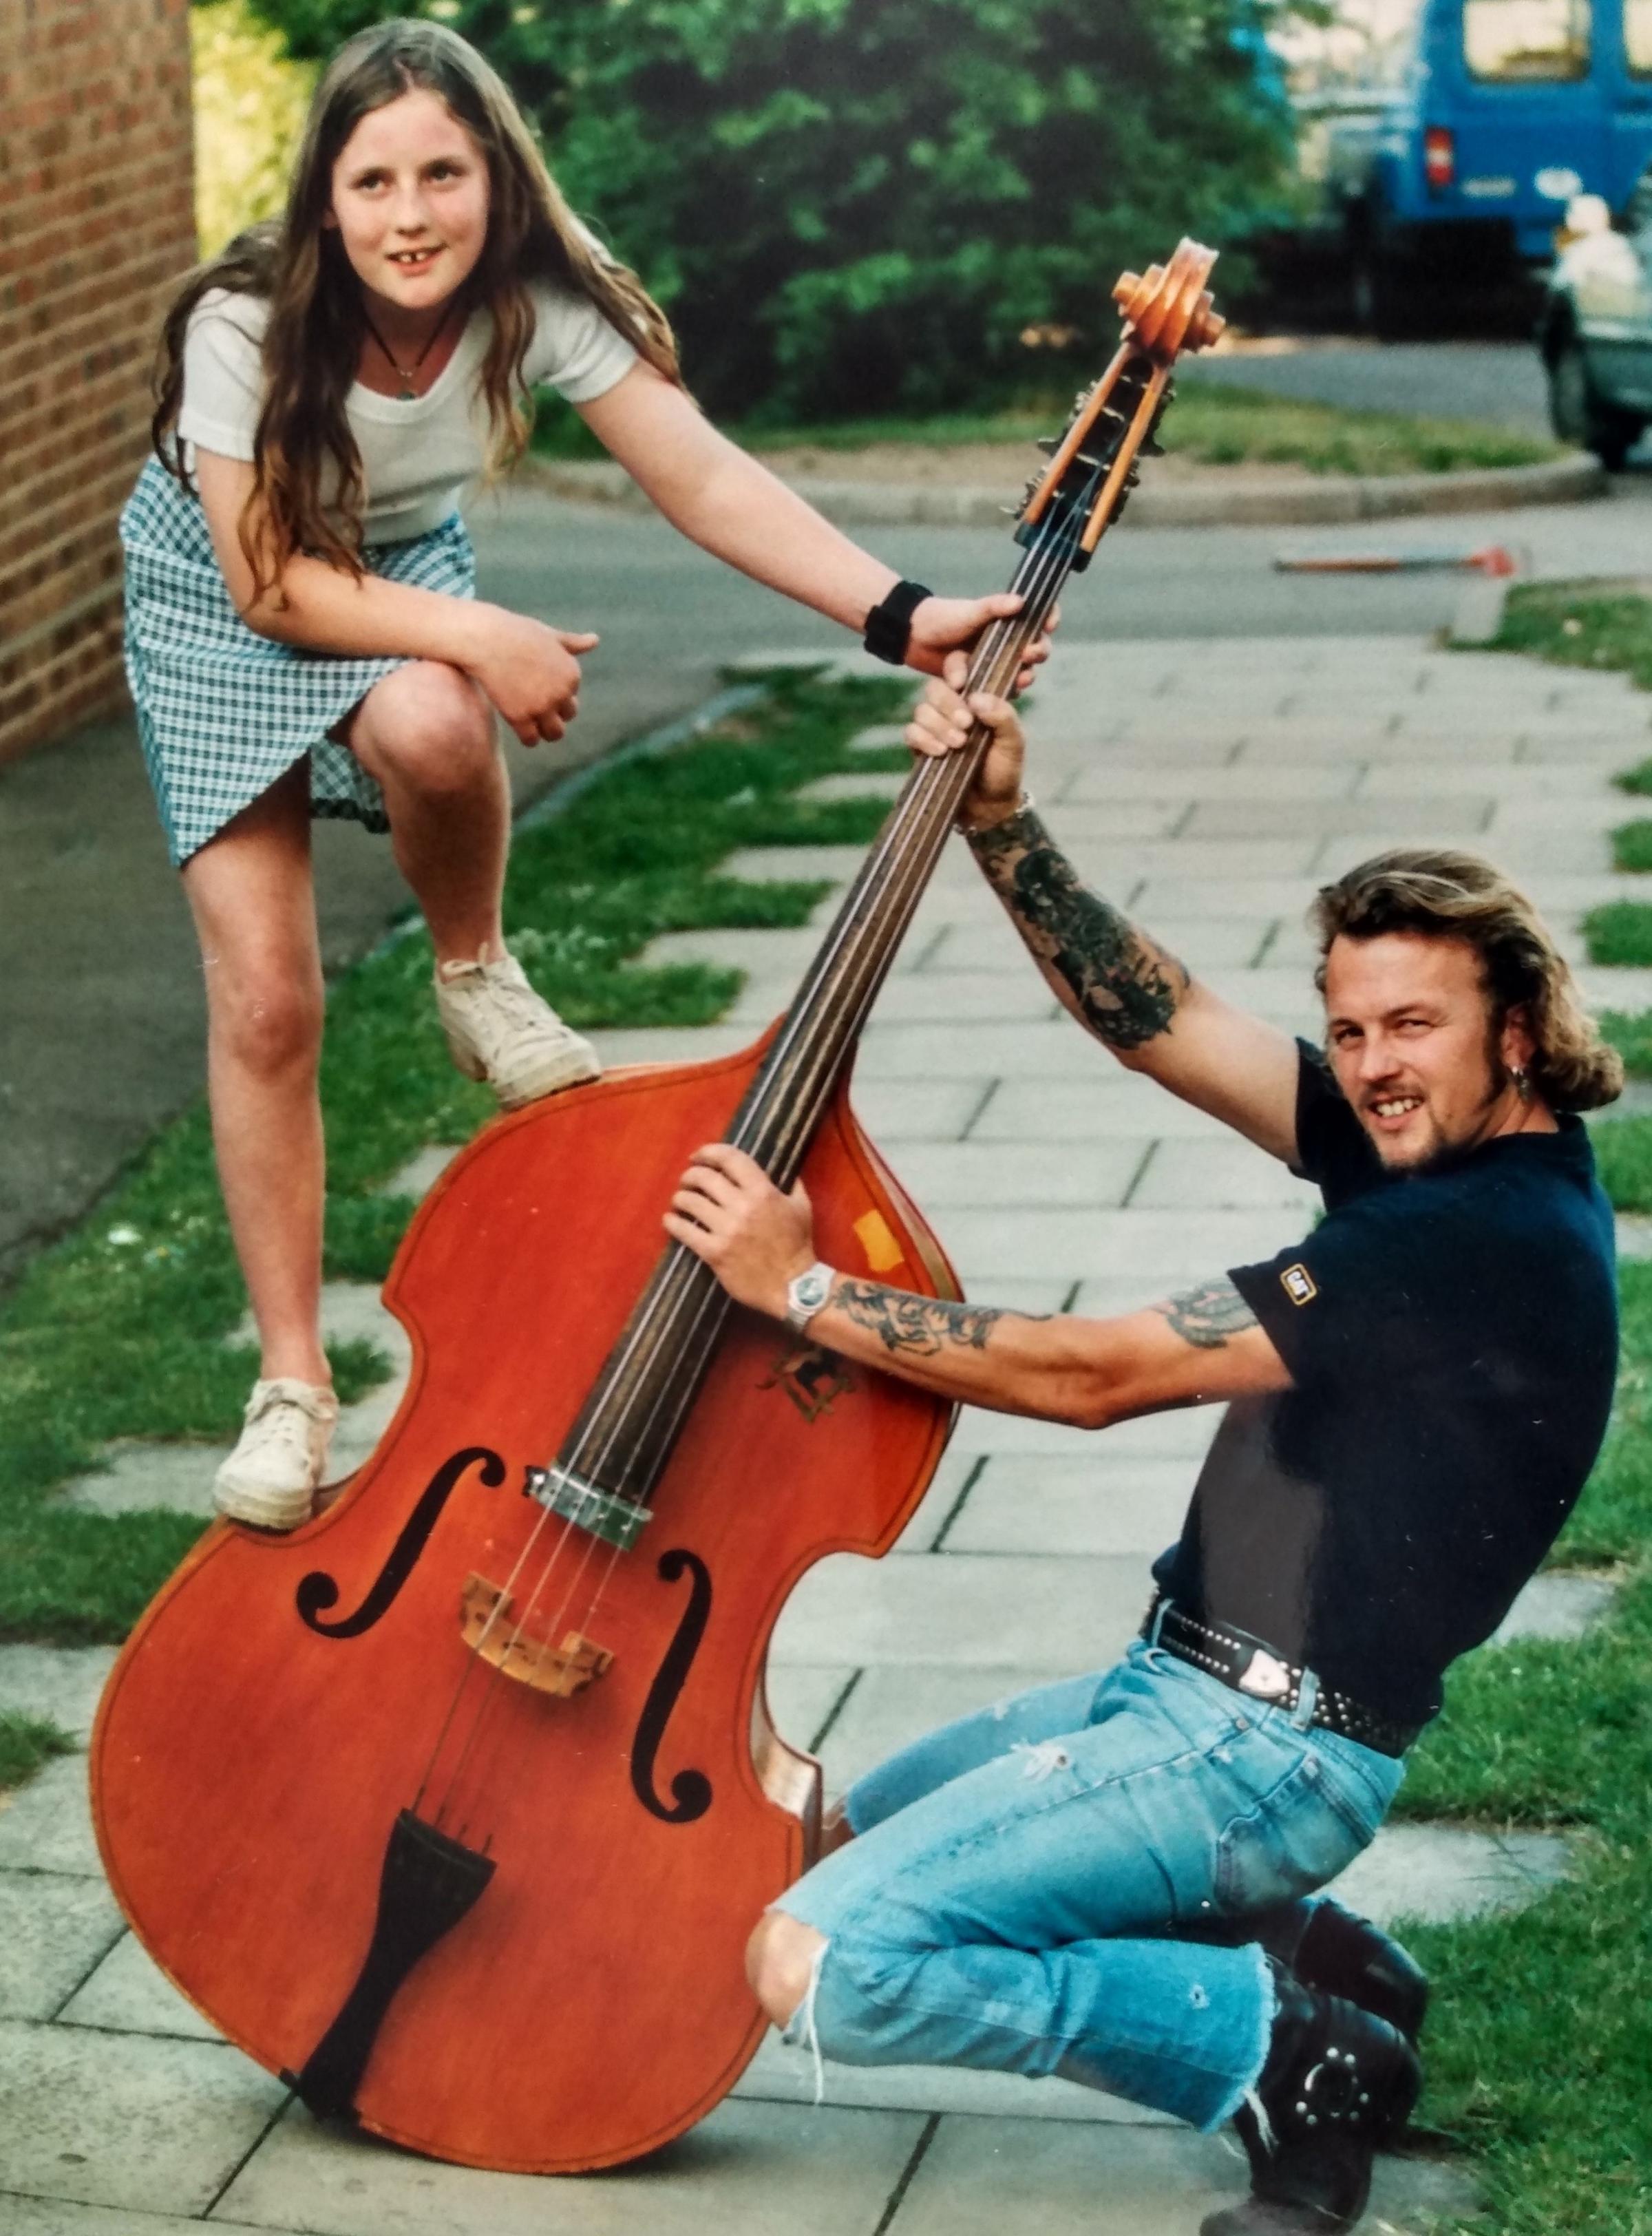 Gary Clarke came to the rescue for Lucy Cayley, after he heard about her broken double bass. Gary, who played in three local bands, stepped in to lend Lucy one of his three instruments